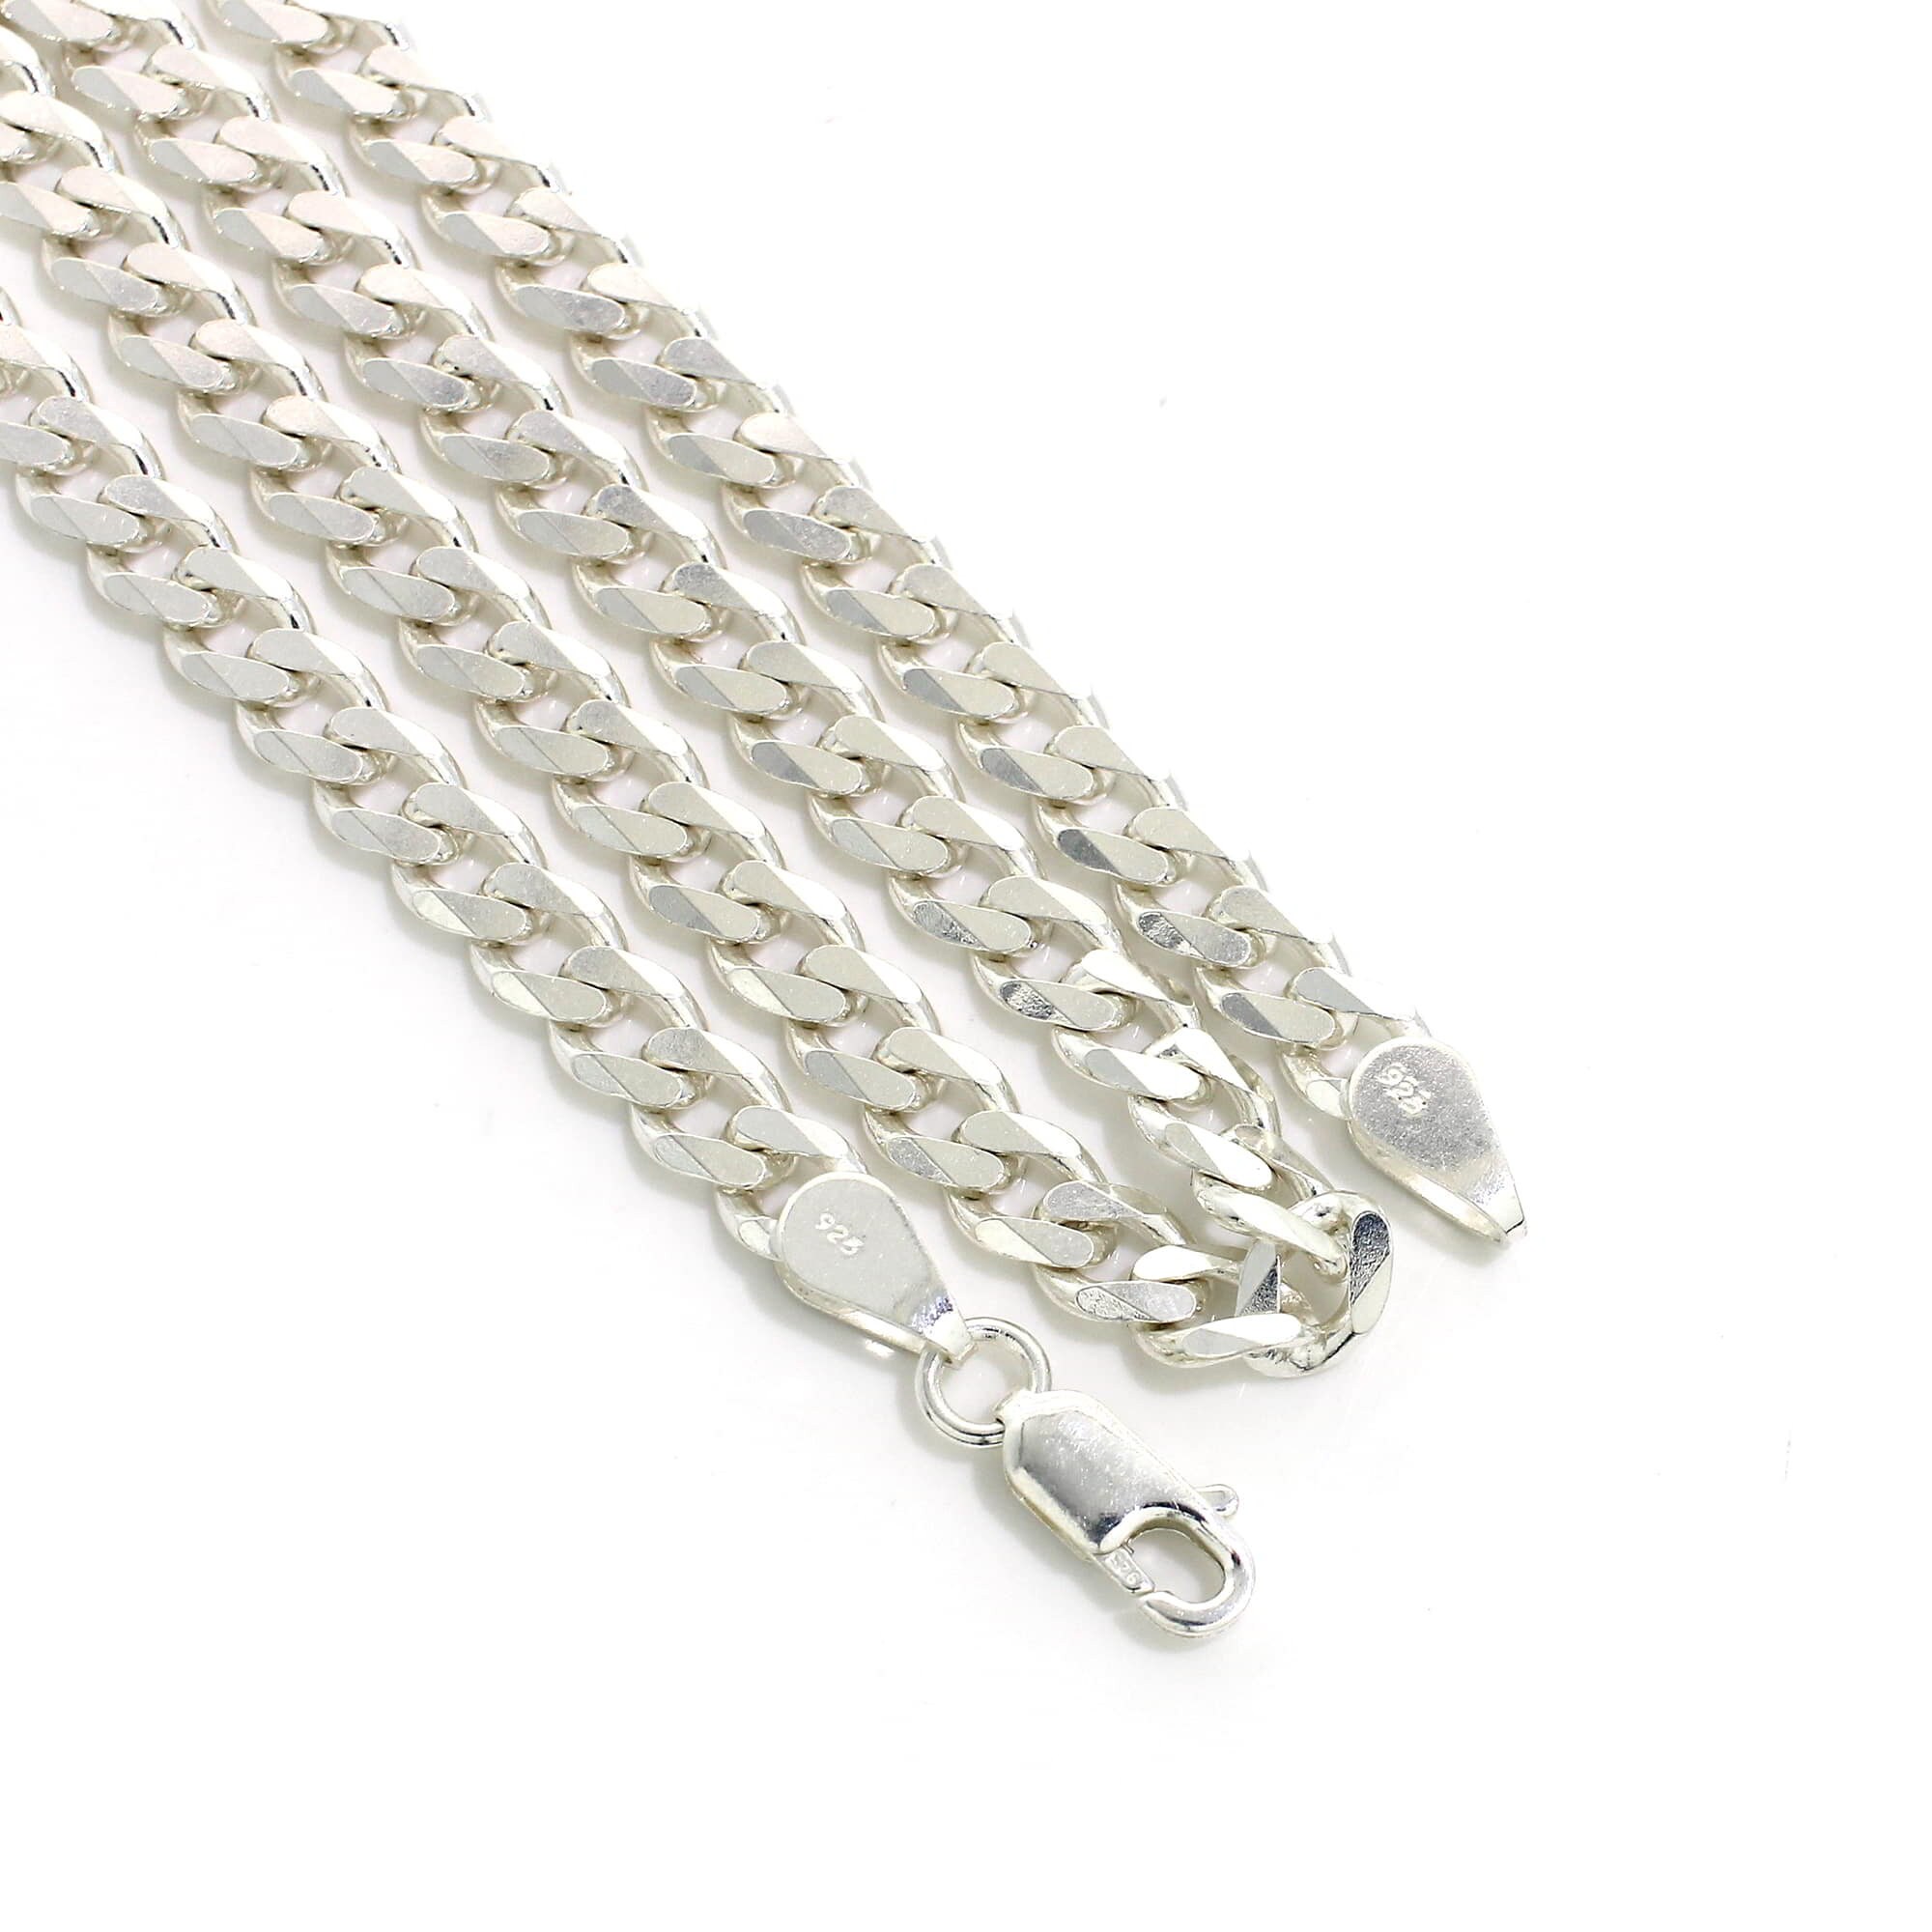 18K GP Stainless Steel 5mm Cuban Link Chain 